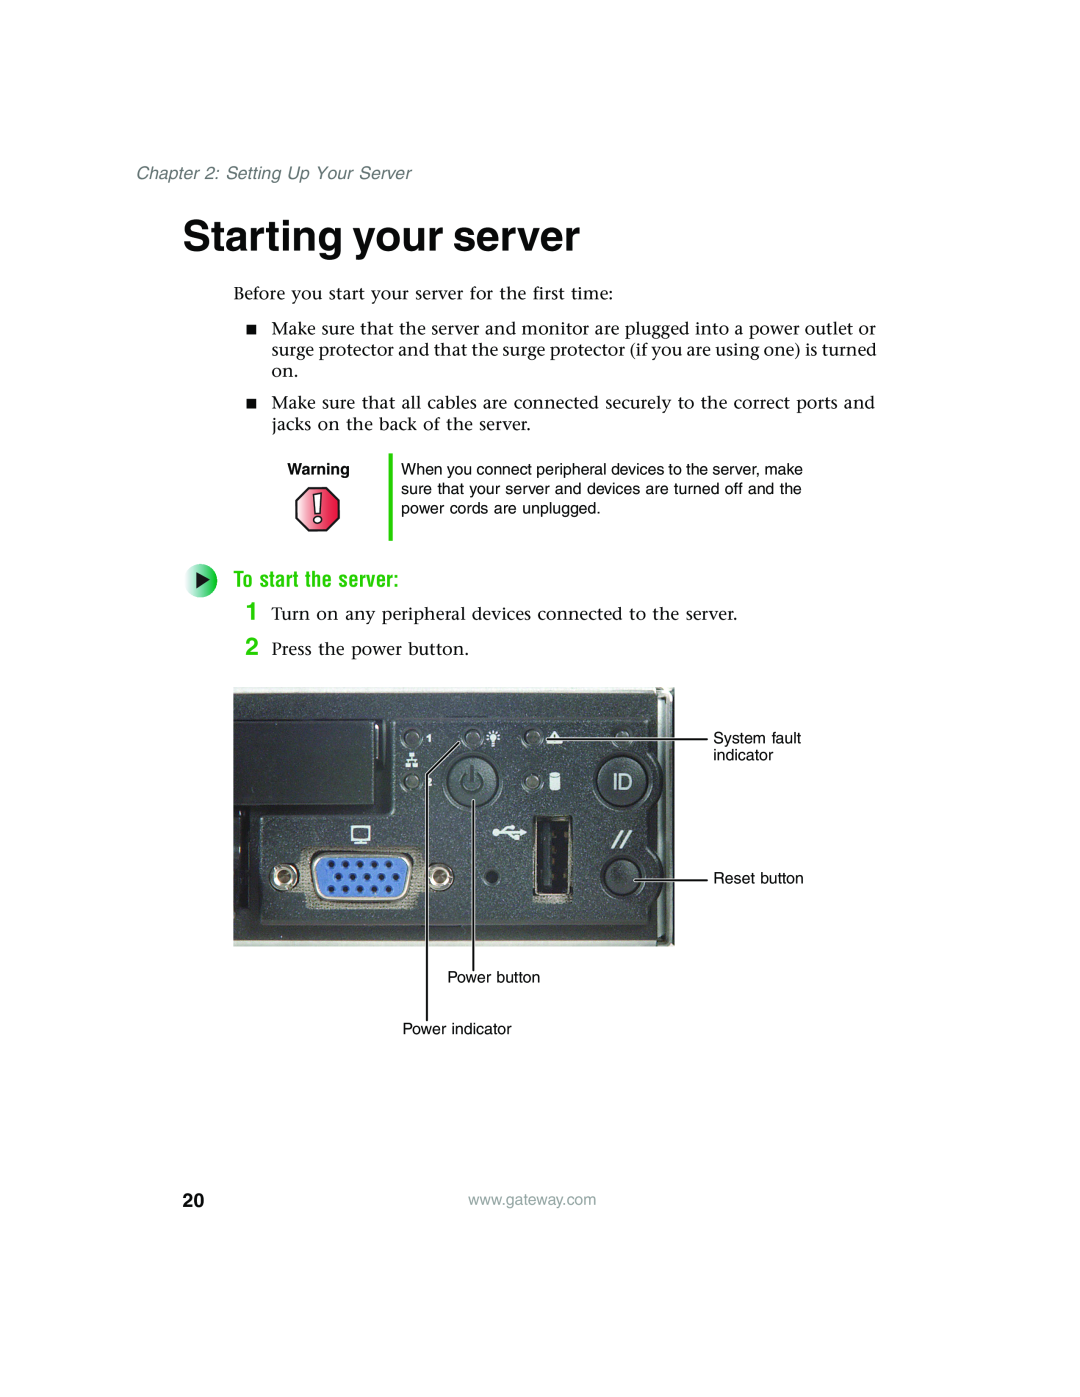 Gateway 955 manual Starting your server, To start the server, Setting Up Your Server 